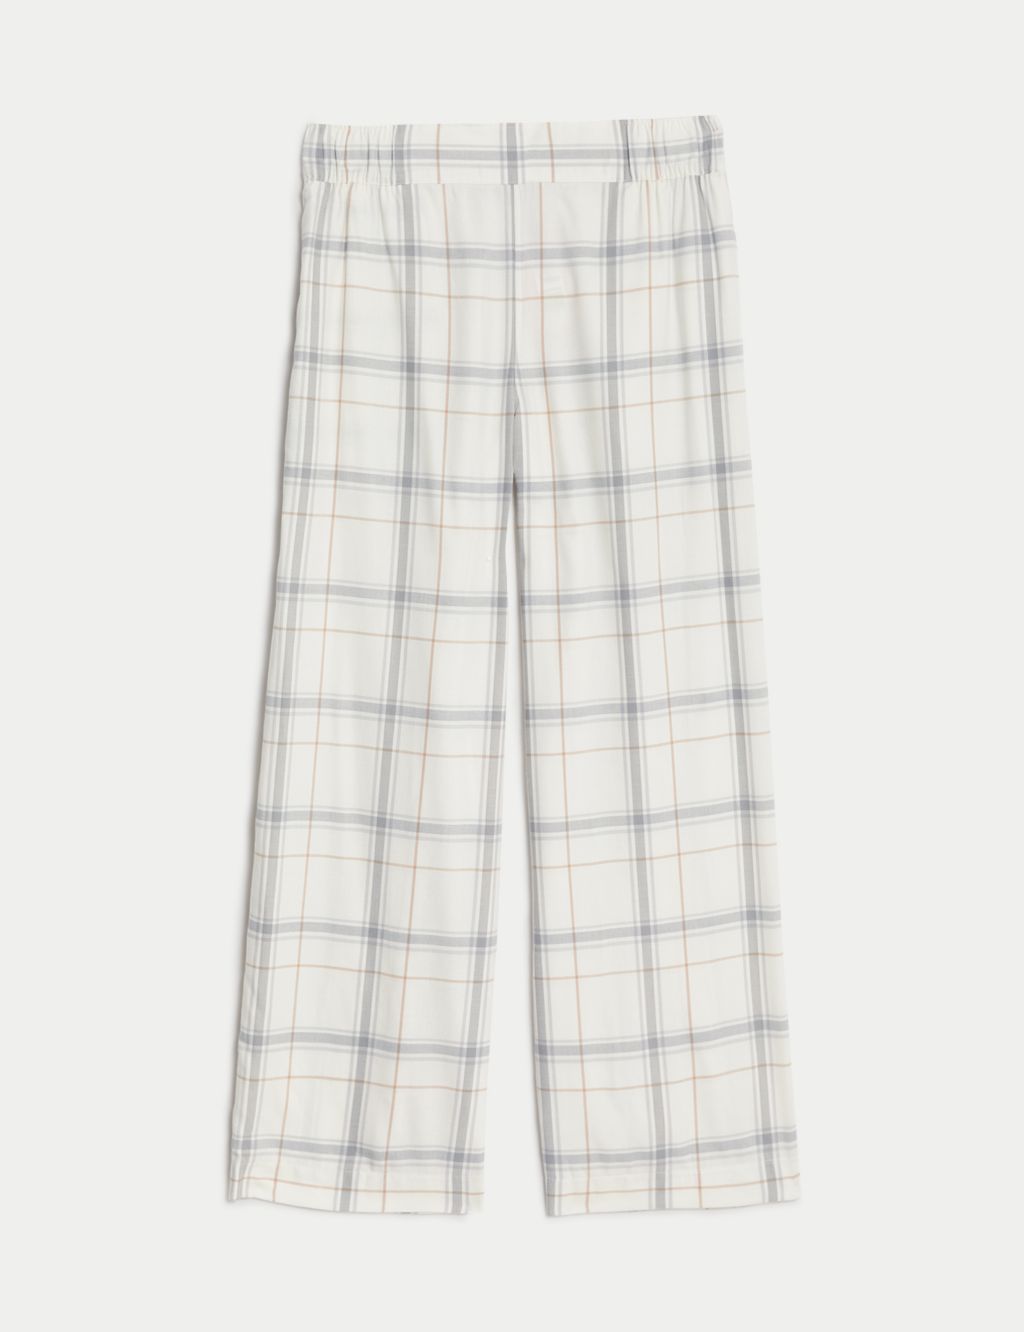 Cotton Rich Woven Checked Lounge Pants image 2